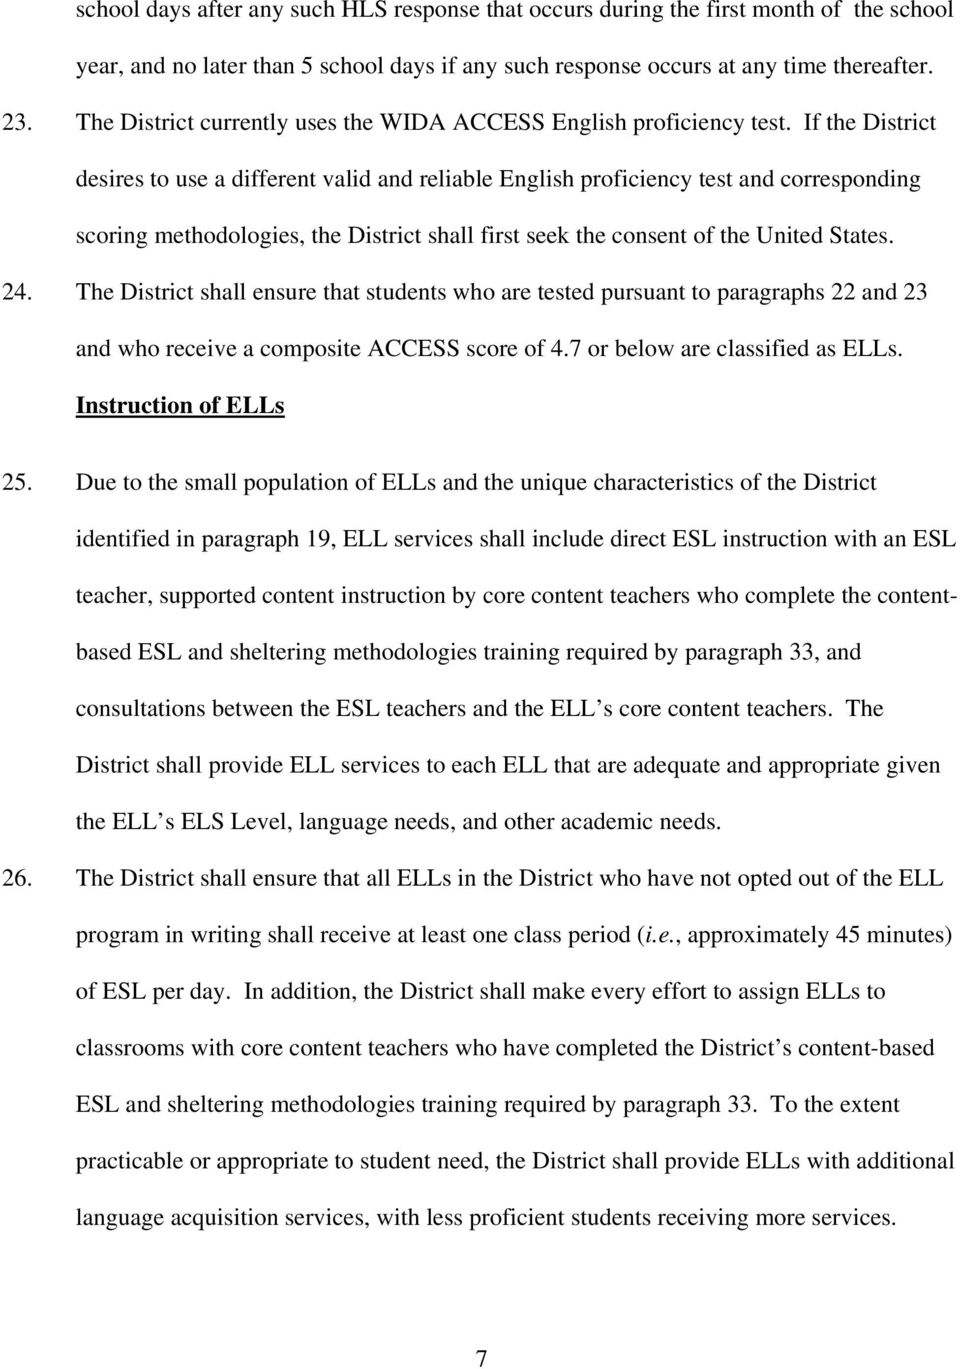 If the District desires to use a different valid and reliable English proficiency test and corresponding scoring methodologies, the District shall first seek the consent of the United States. 24.